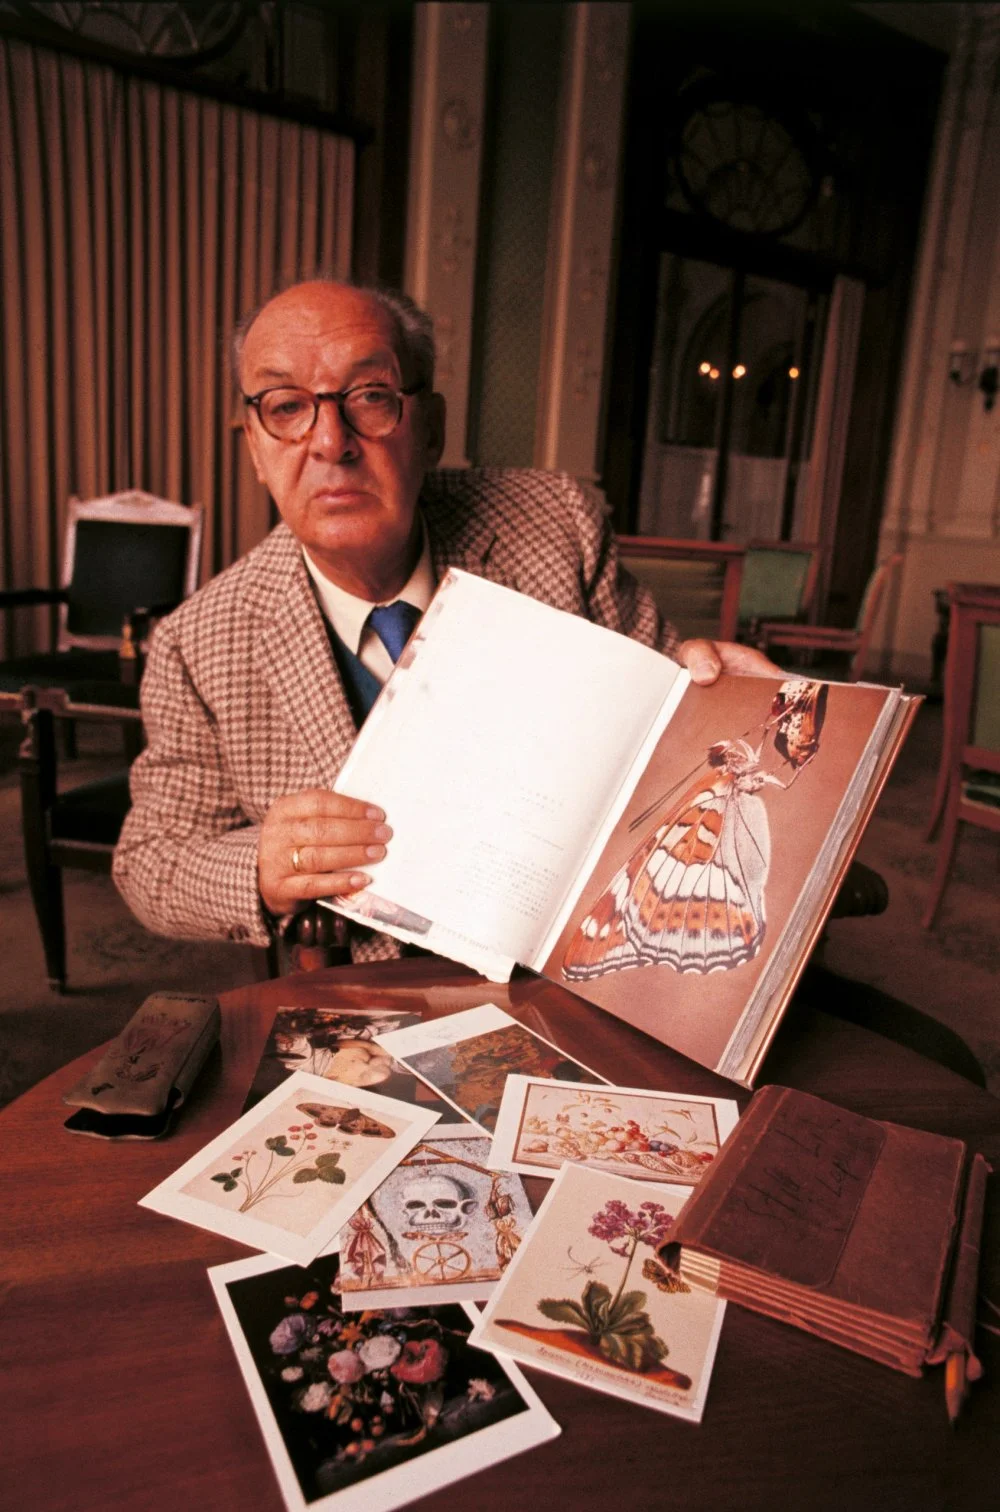 Russian-born American writer Vladimir Nabokov showing some drawings leaning on a table. Montreux, October 1969/Giuseppe Pino/Mondadori via Getty Images